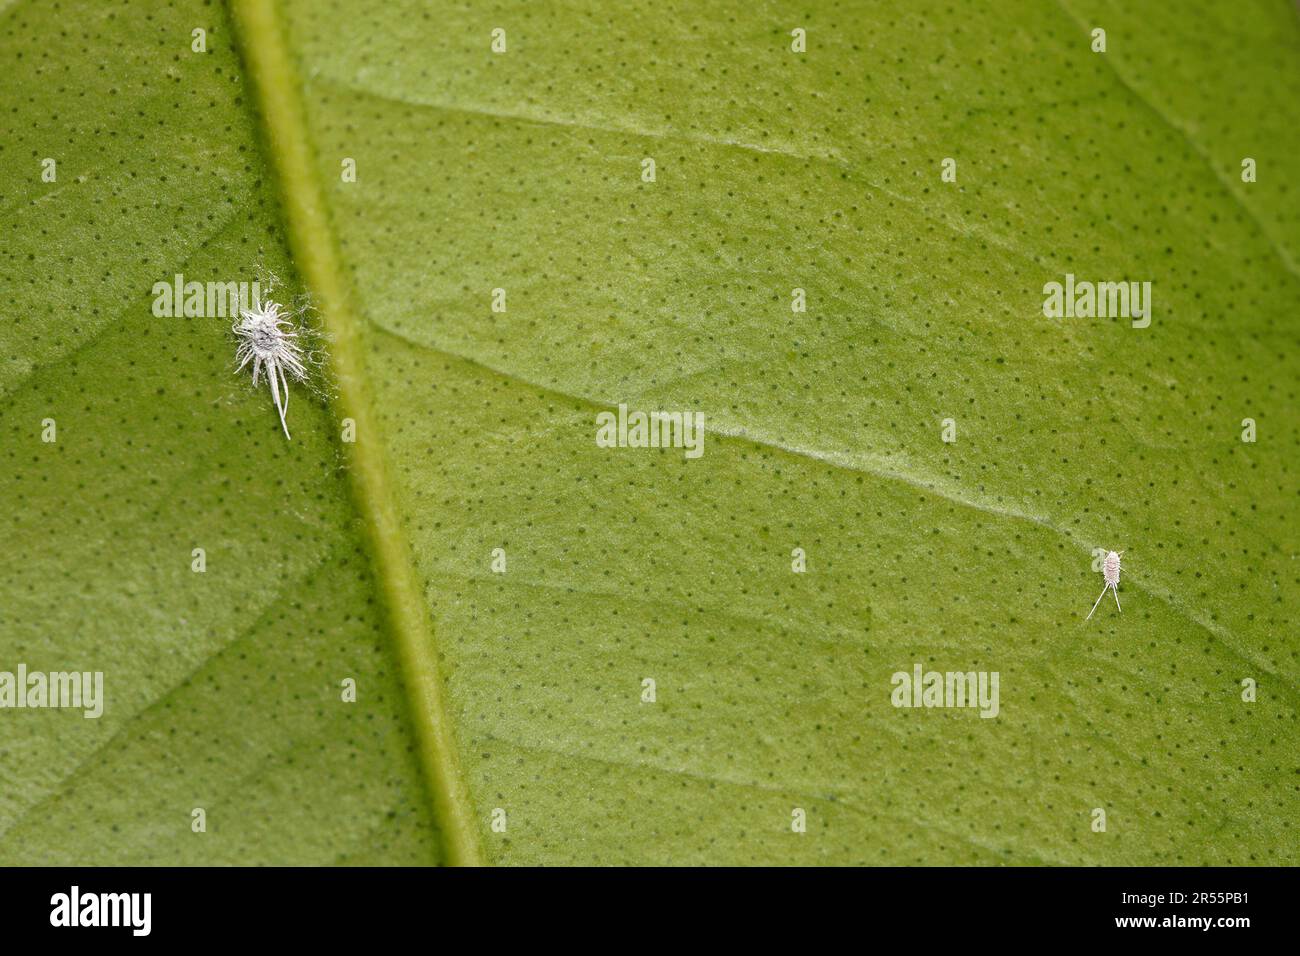 Mealy bugs on a calamandin leaf. Long-tailed mealybug (Pseudococcus longispinus). Female adult and nymph. Stock Photo